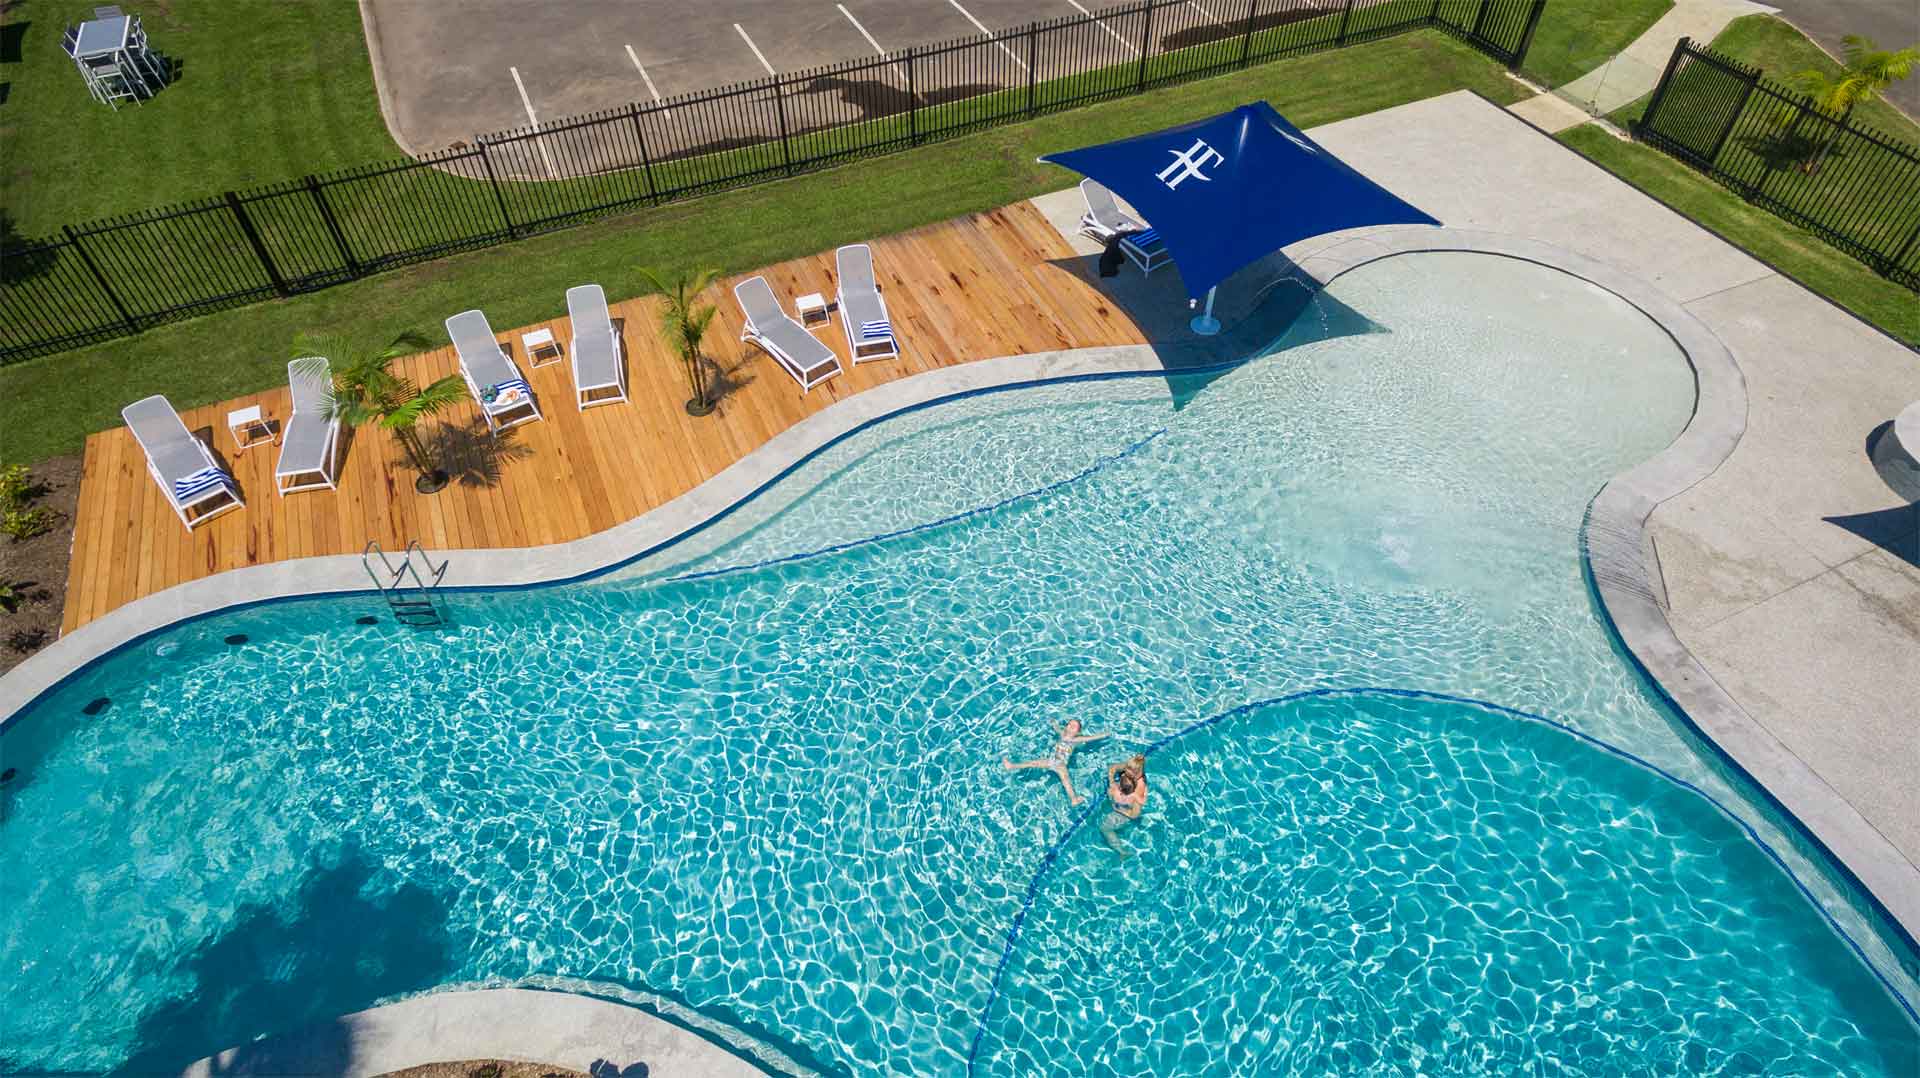 13. Hotel Forster birds eye view of new oasis pool